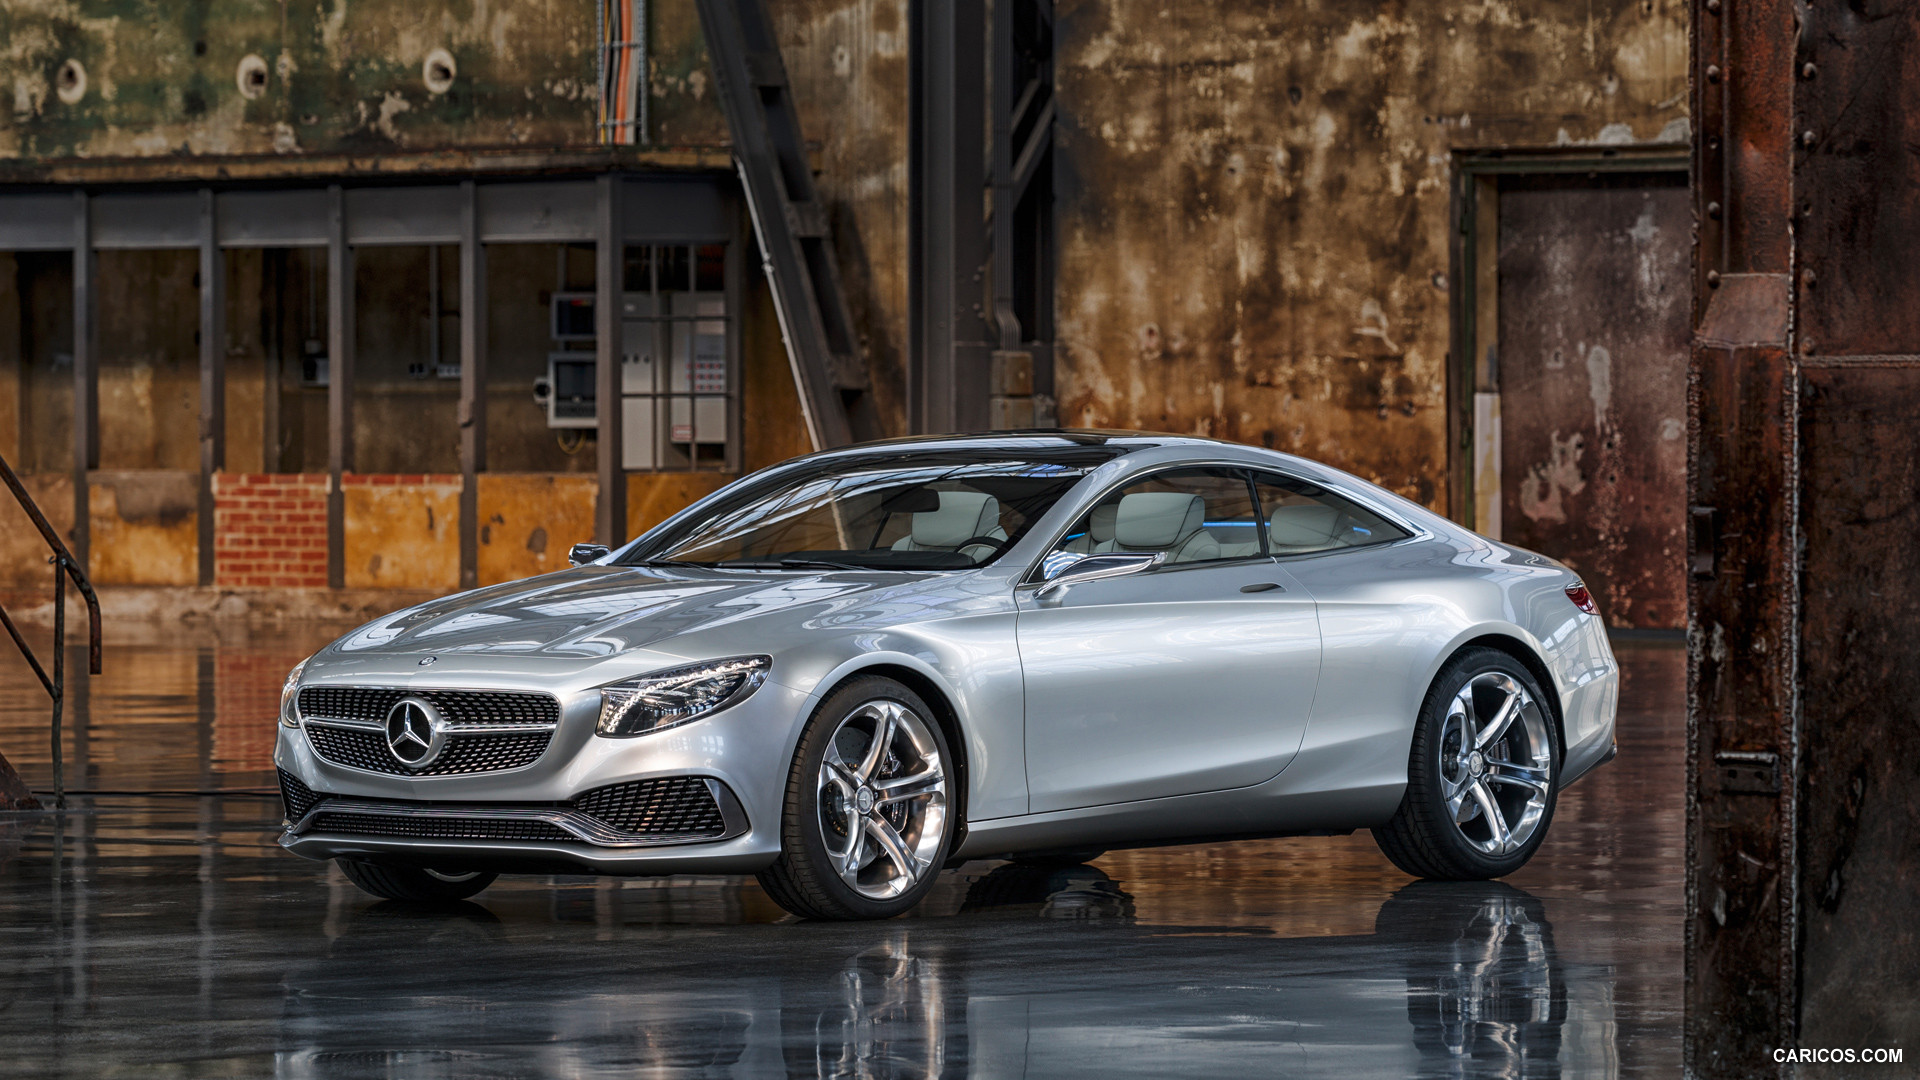 Mercedes-Benz S-Class Coupe Concept (2013)  - Front, #18 of 58